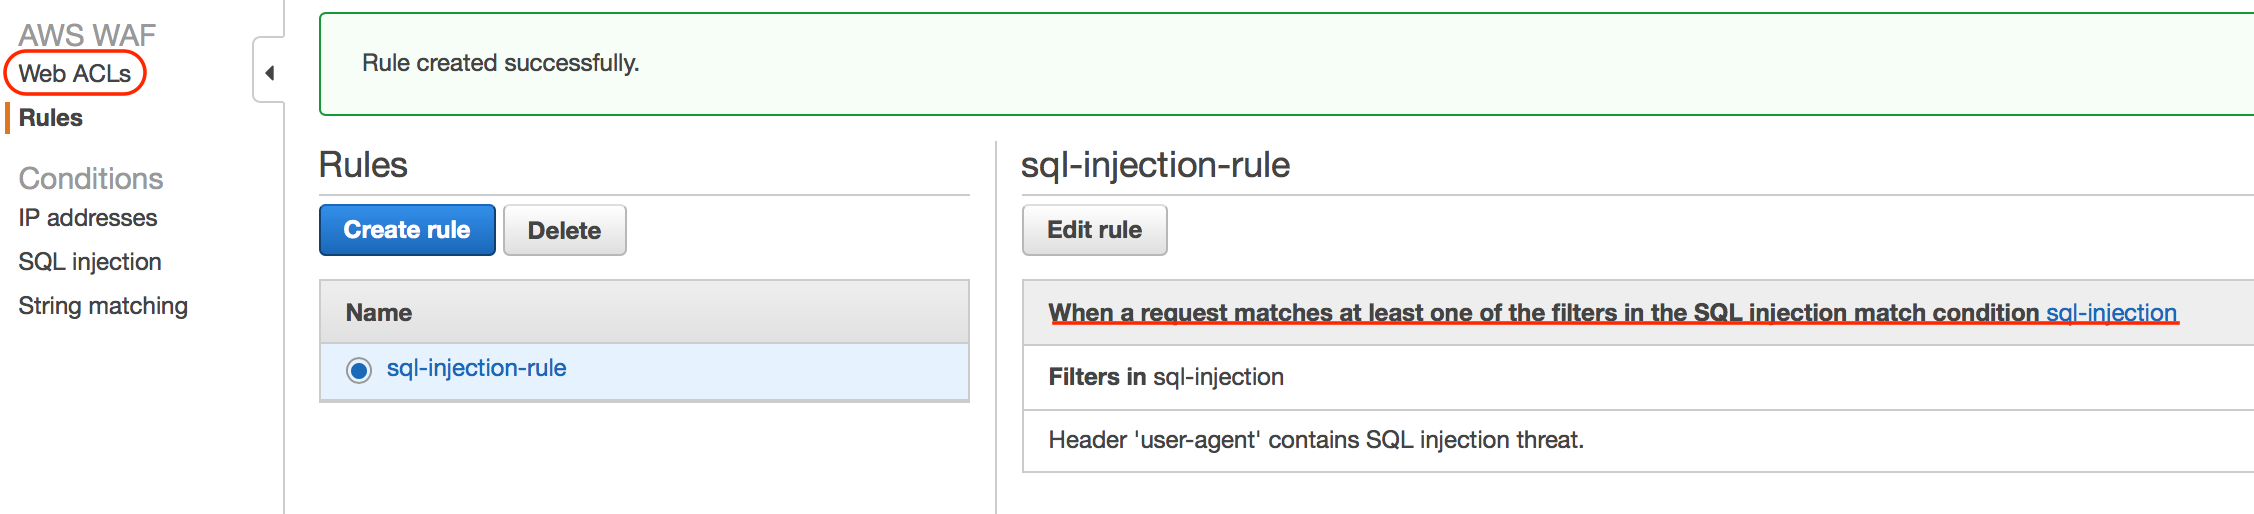 aws-waf_sql-injection_2015120408.png